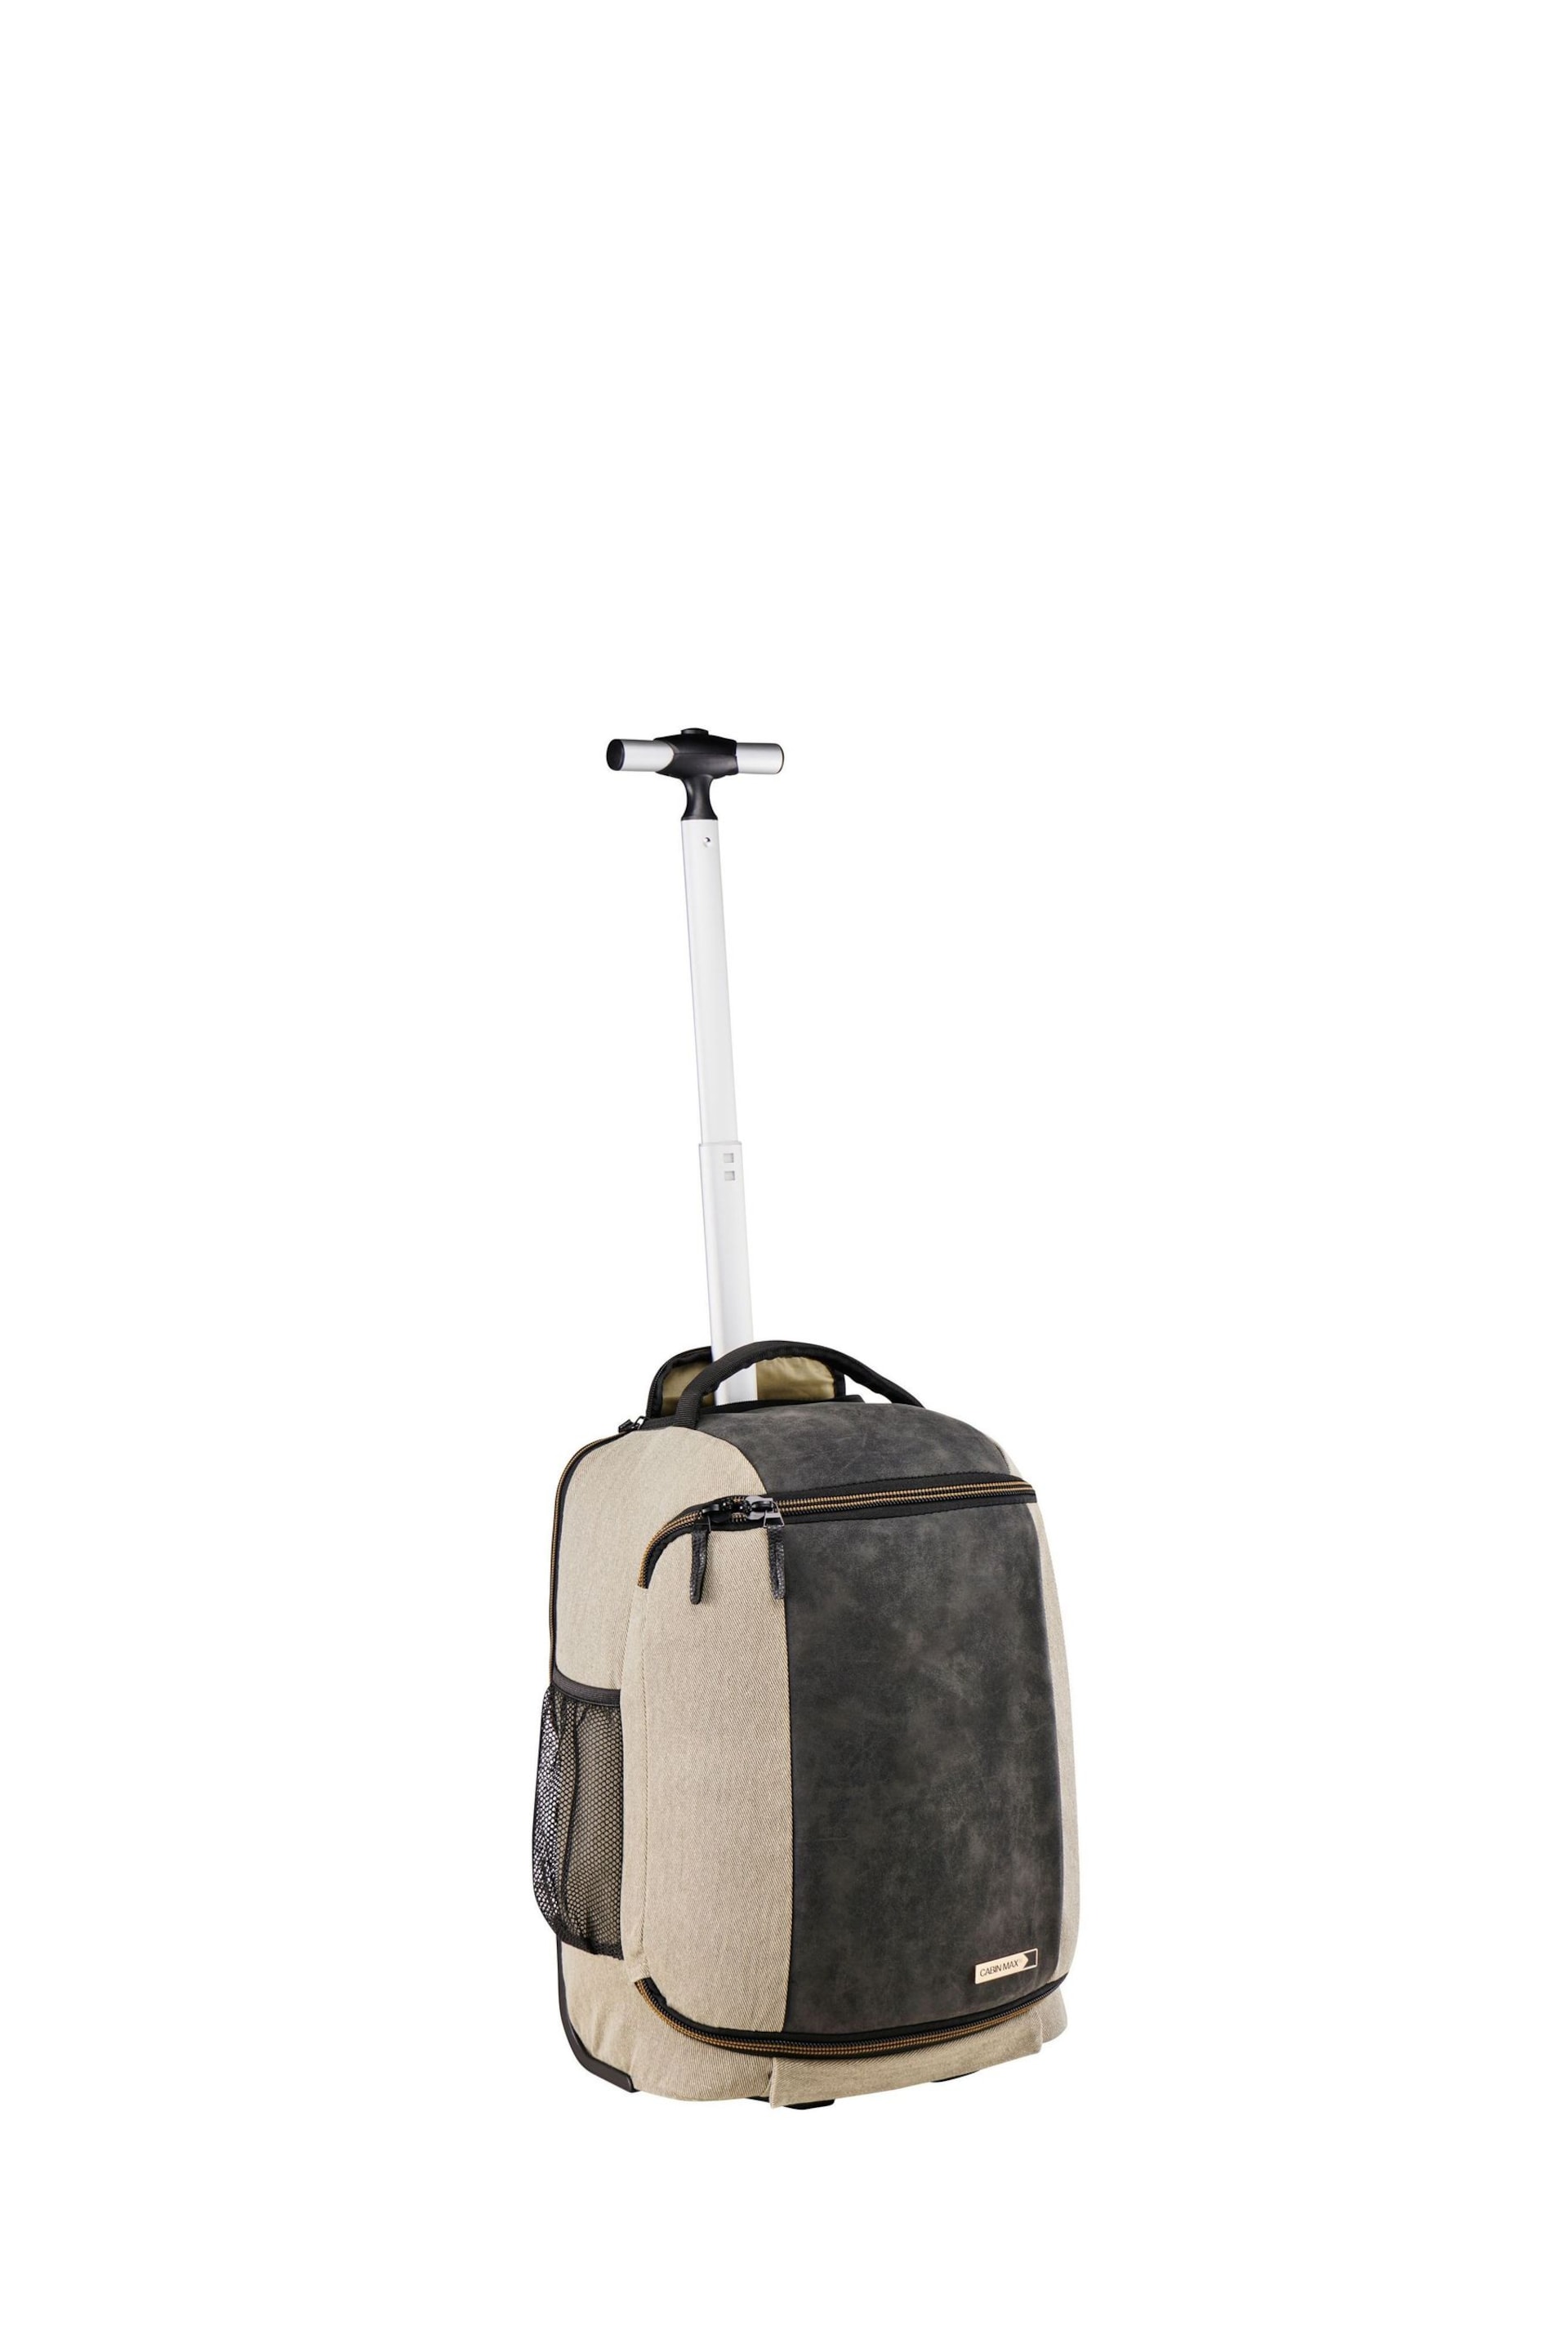 Cabin Max Manhattan Hybrid 30 Litre 45x36x20cm Backpack / Trolley Easyjet Carry on Hand Luggage - Image 1 of 10